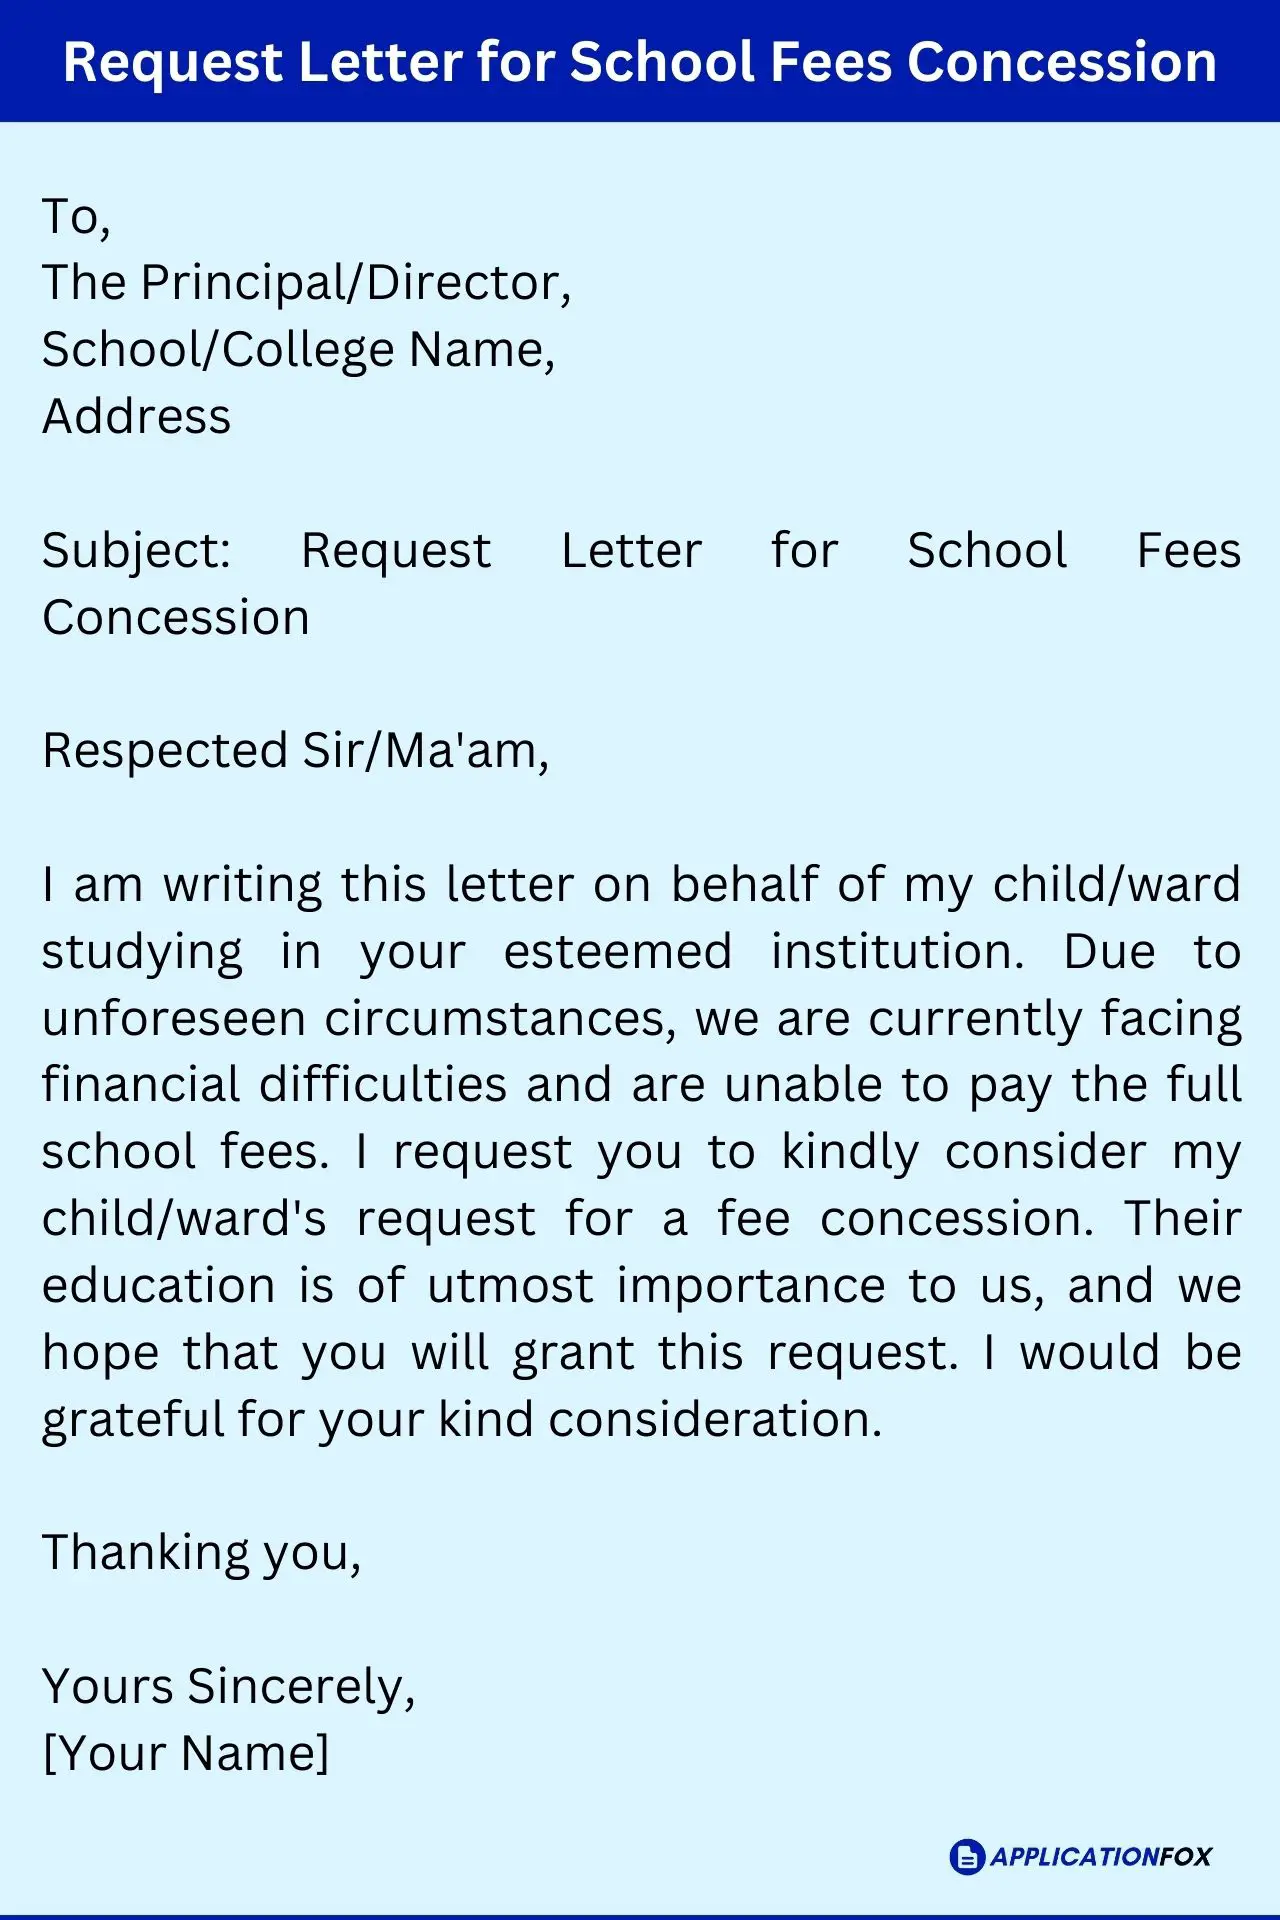 Request Letter for School Fees Concession